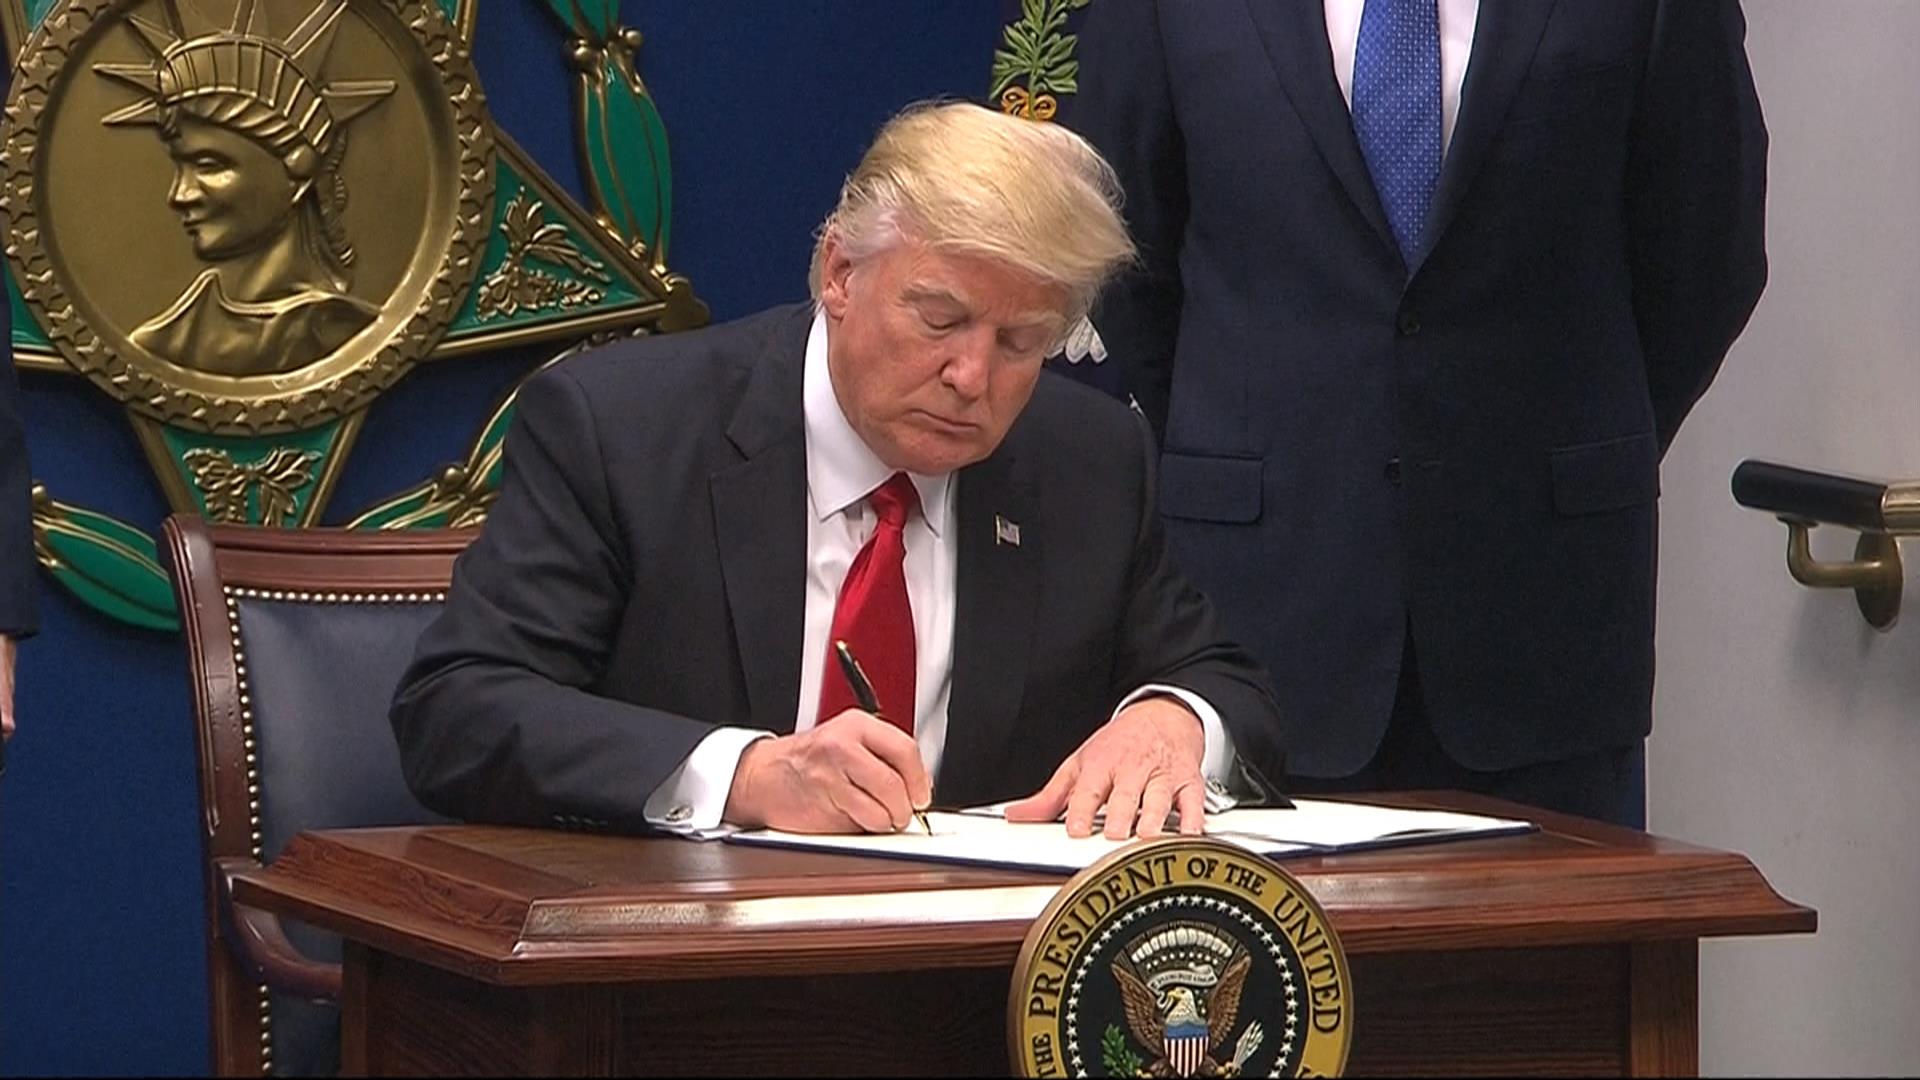 Trump Signs Order Suspending Admission of Syrian Refugees